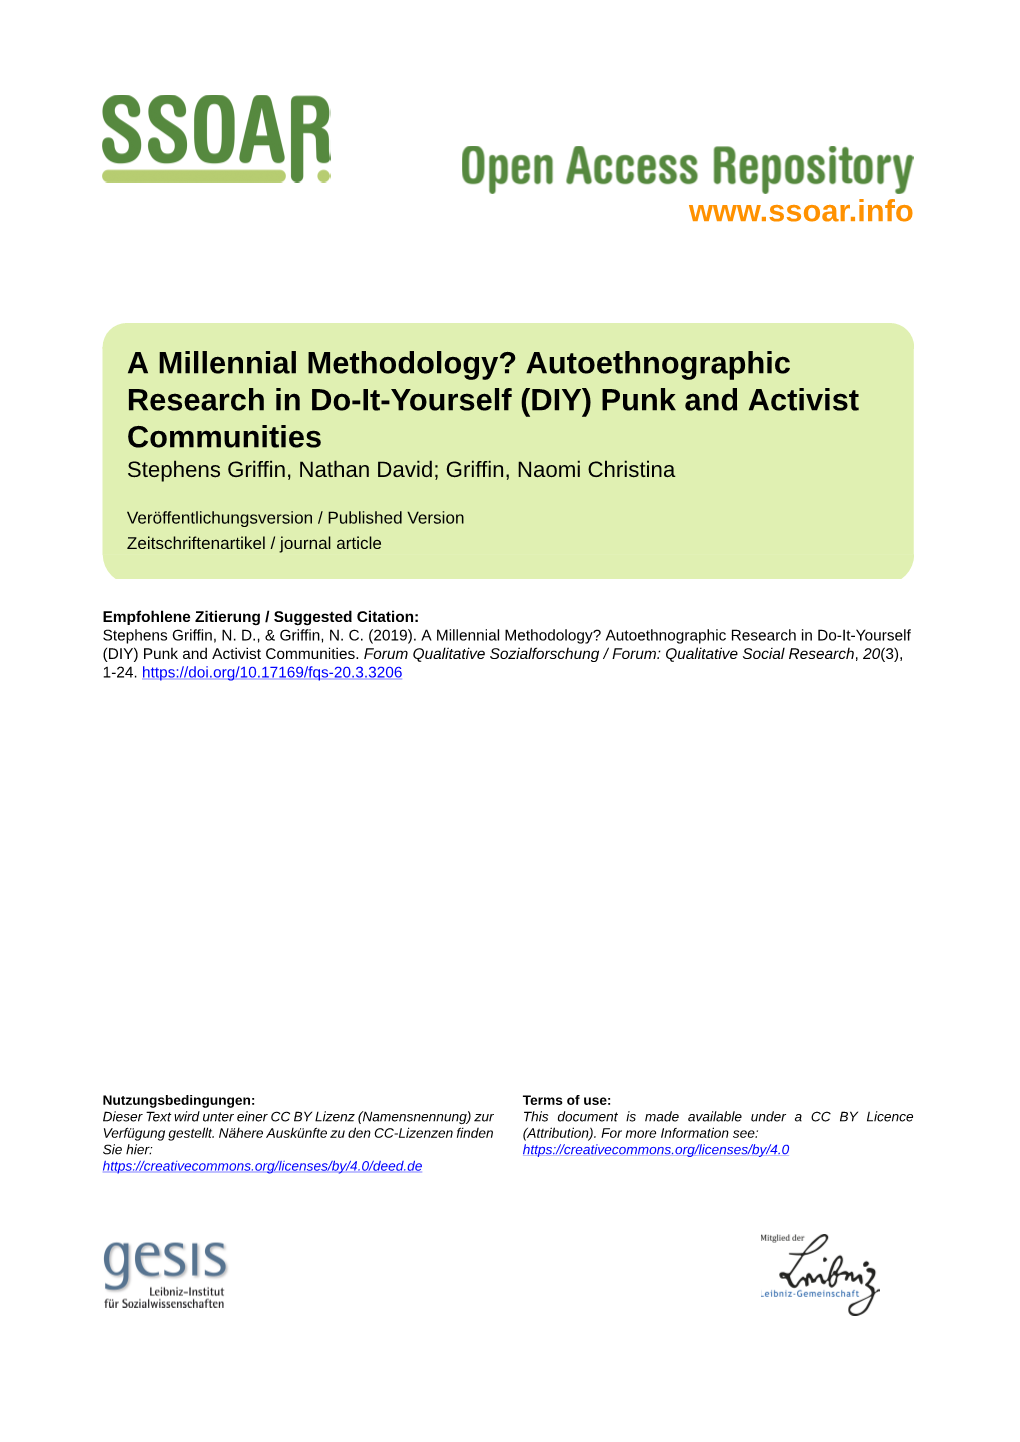 A Millennial Methodology? Autoethnographic Research in Do-It-Yourself (DIY) Punk and Activist Communities Stephens Griffin, Nathan David; Griffin, Naomi Christina